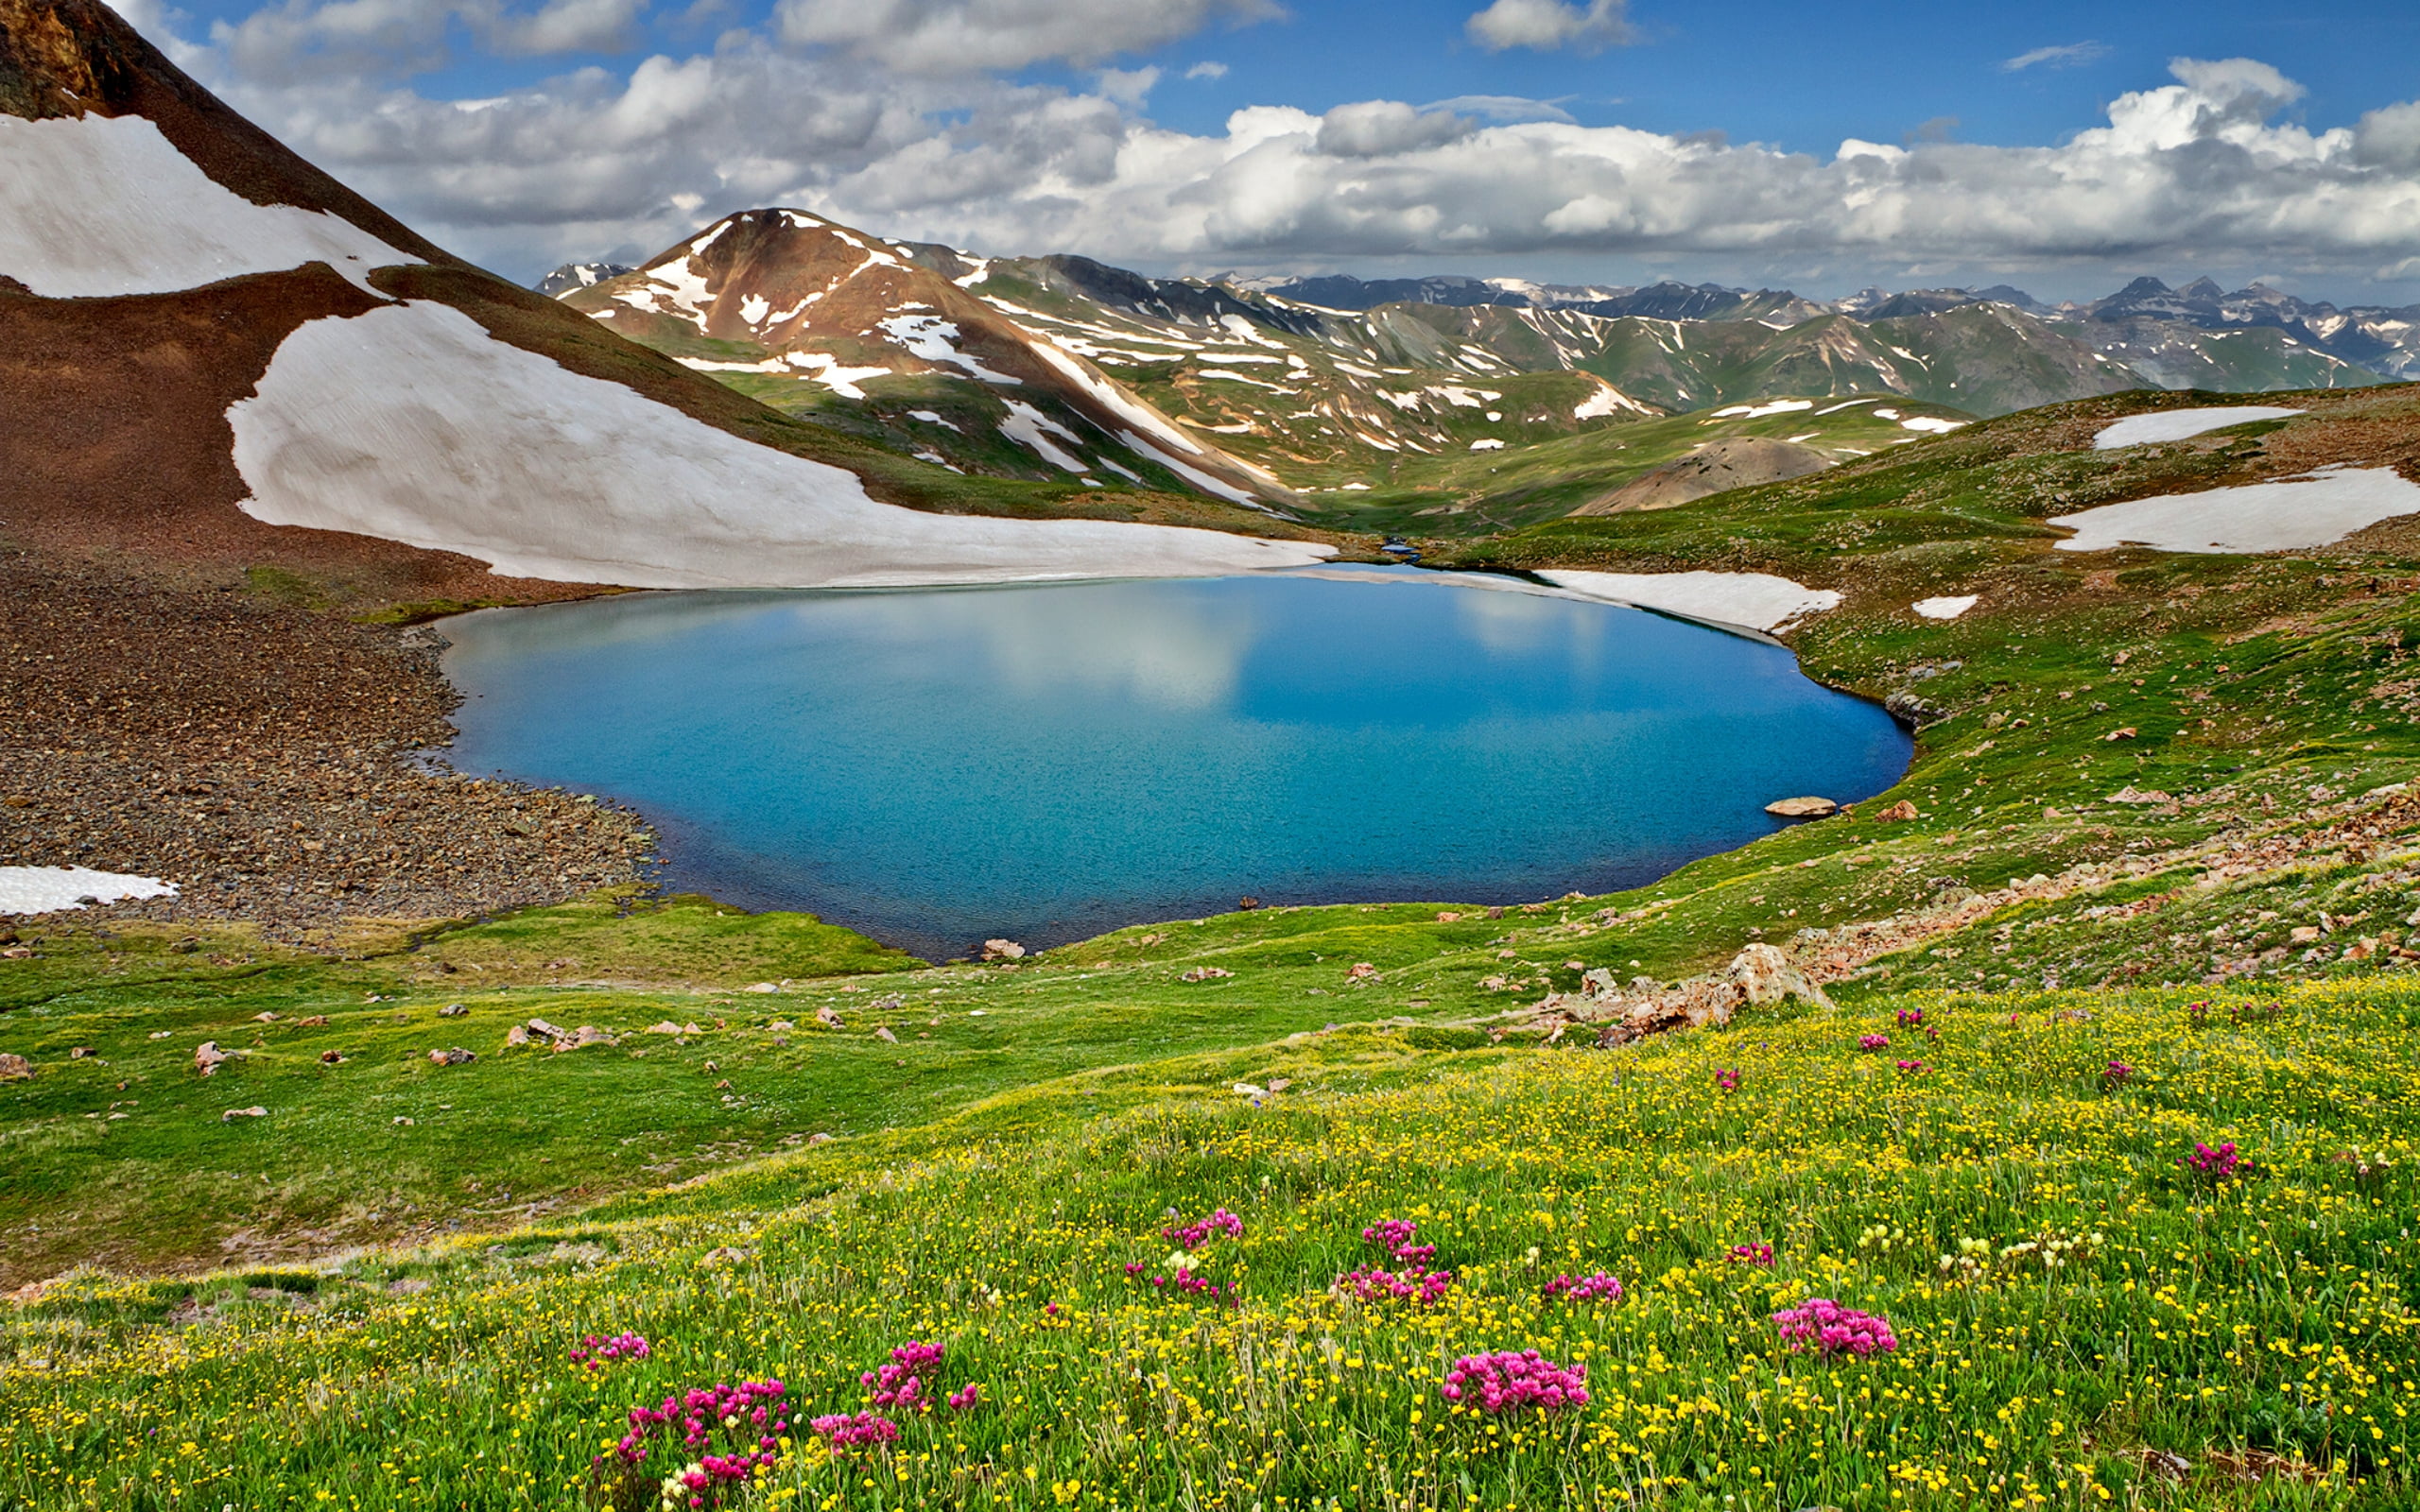 Photo Of Lake Surrounded By Mountain Ranges And Plants During Daytime